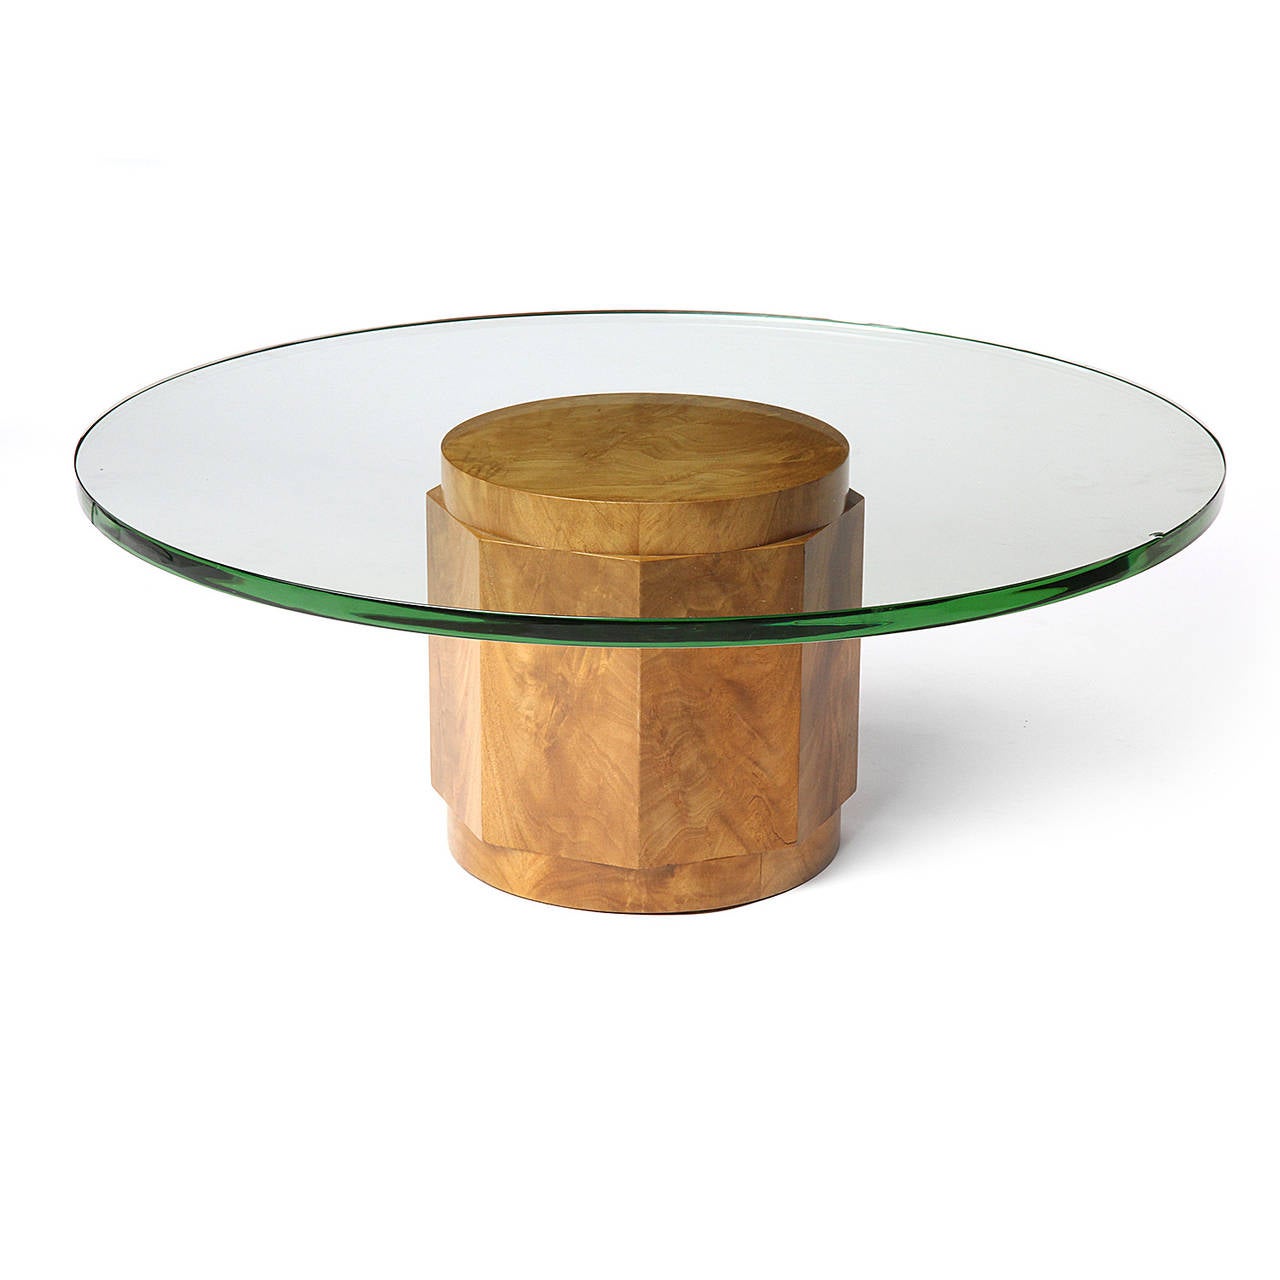 An elegant and sculptural low table having a burled faceted columnar wooden base supporting a thick round glass top.